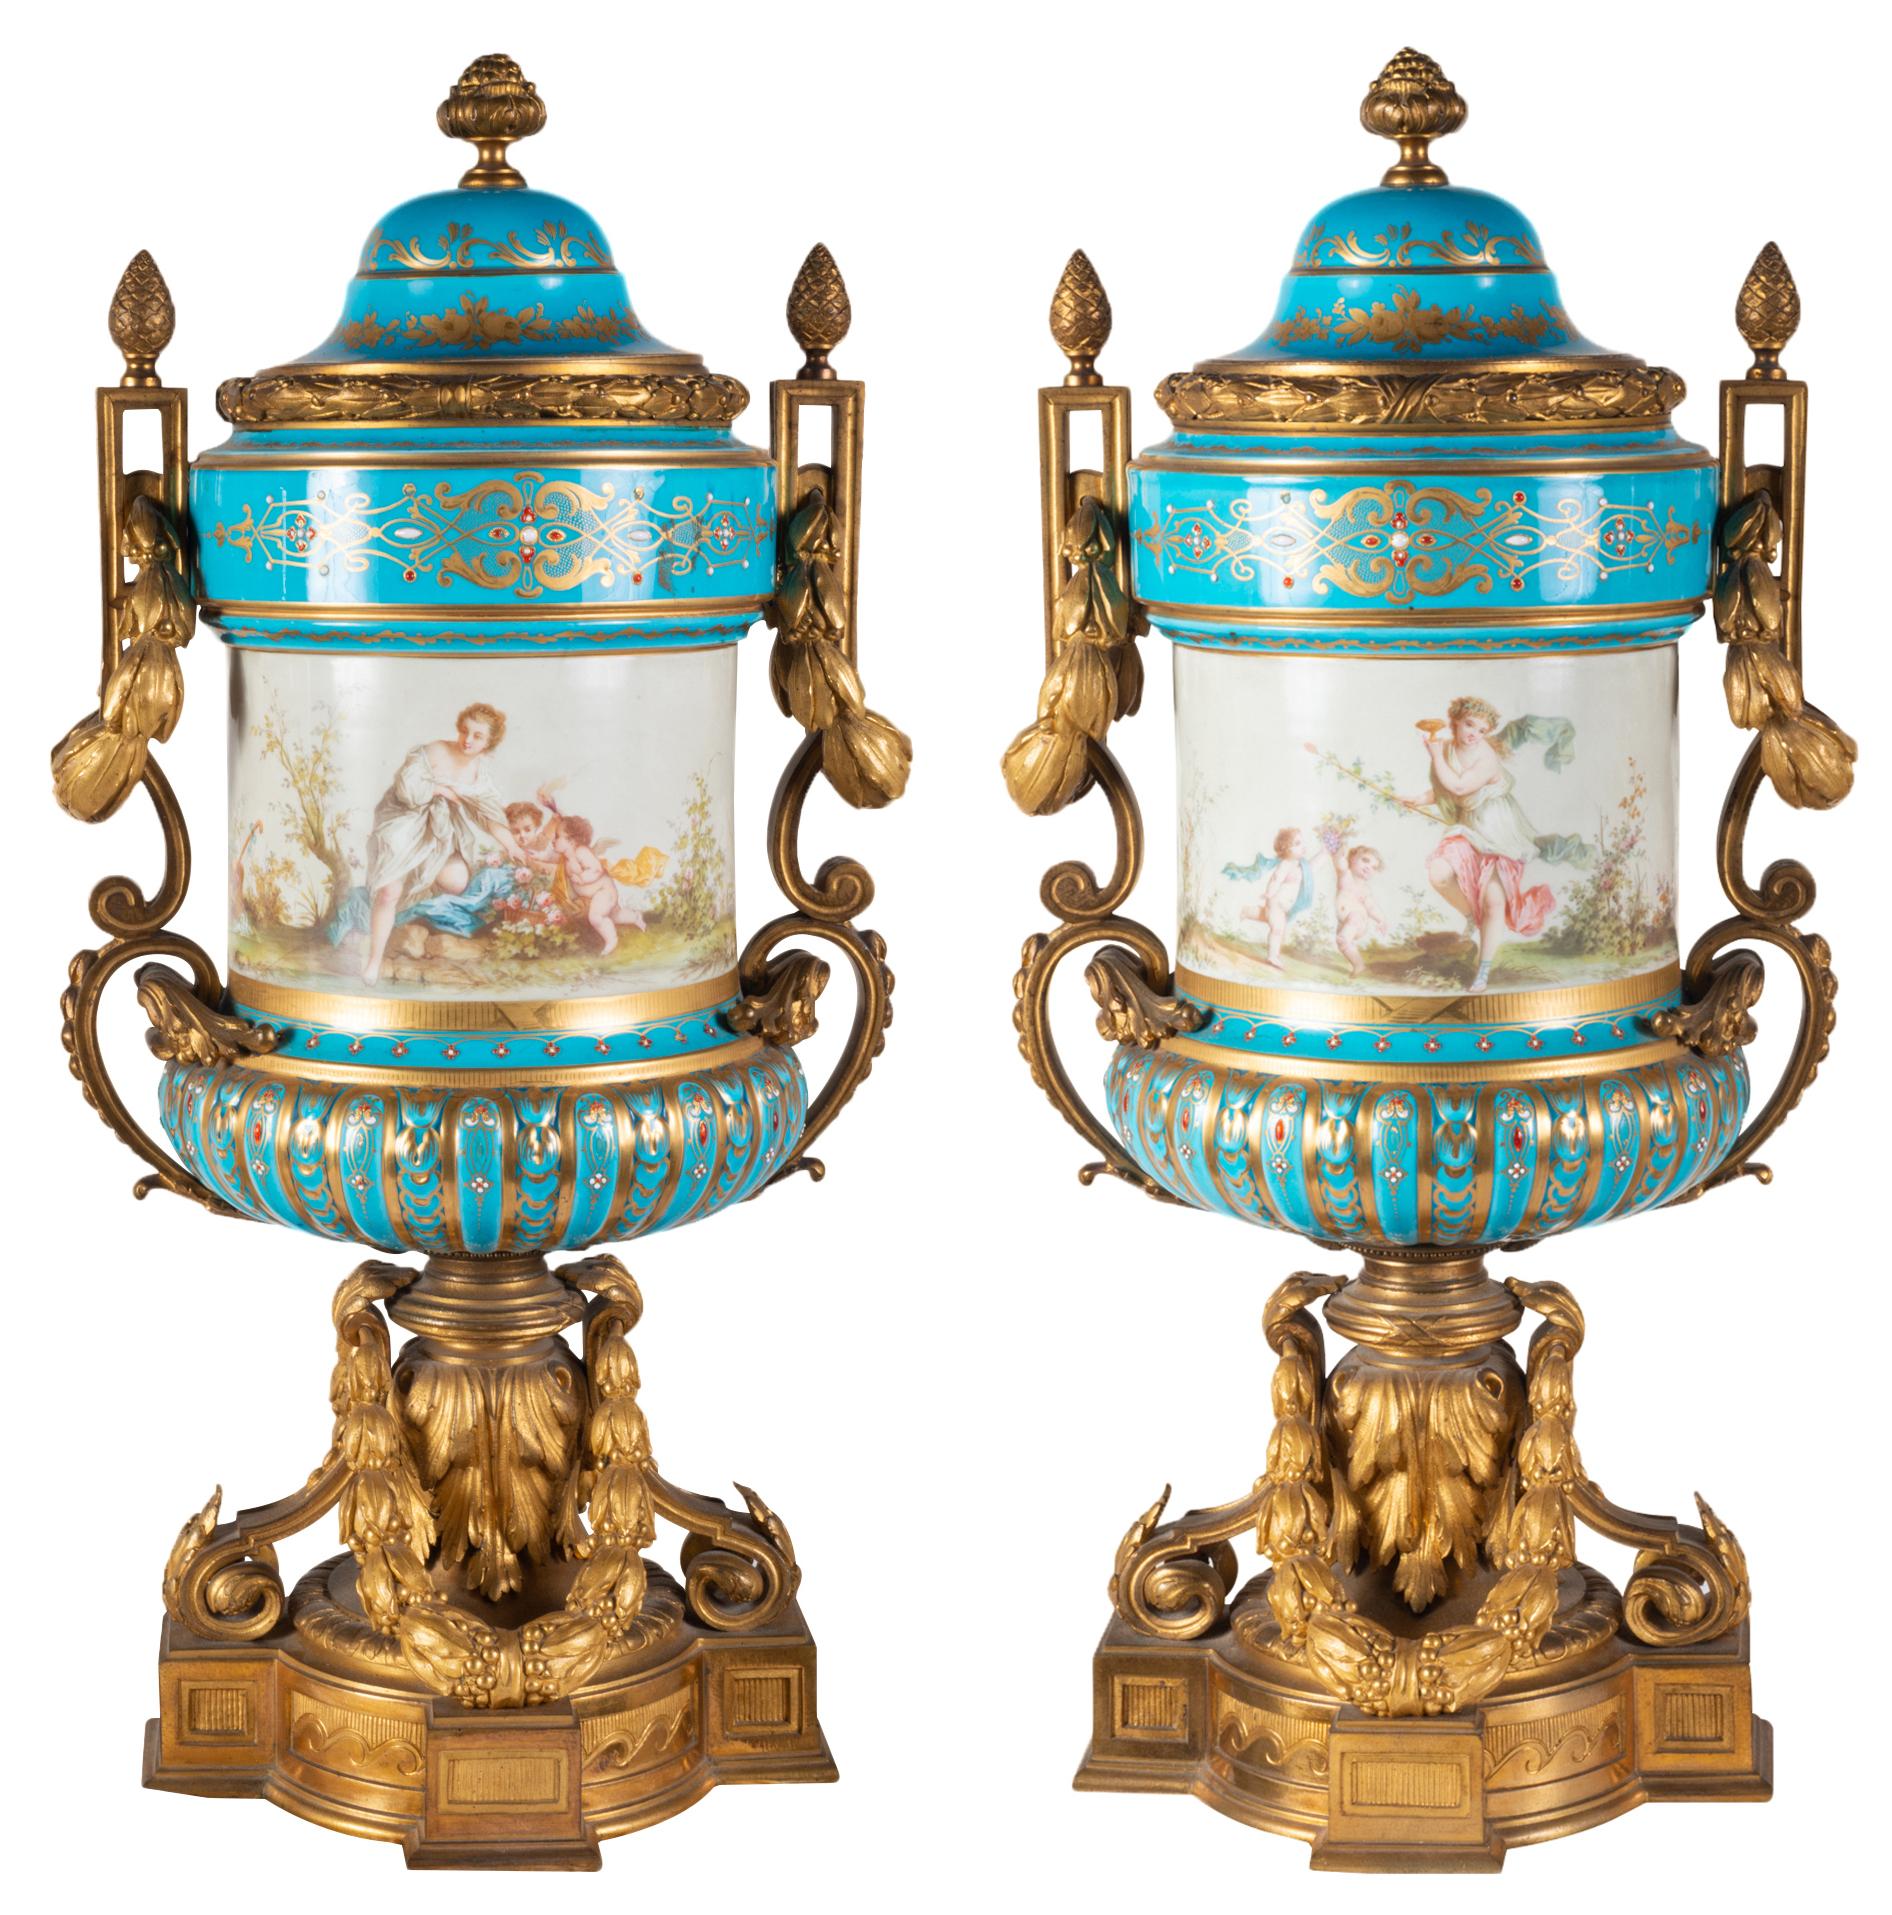 A fine quality pair of late 19th century French 'Sevres' style lidded vases, each with a turquoise ground, depicting classical romantic scenes, wonderful gilded ormolu C-scroll and swag mounts.